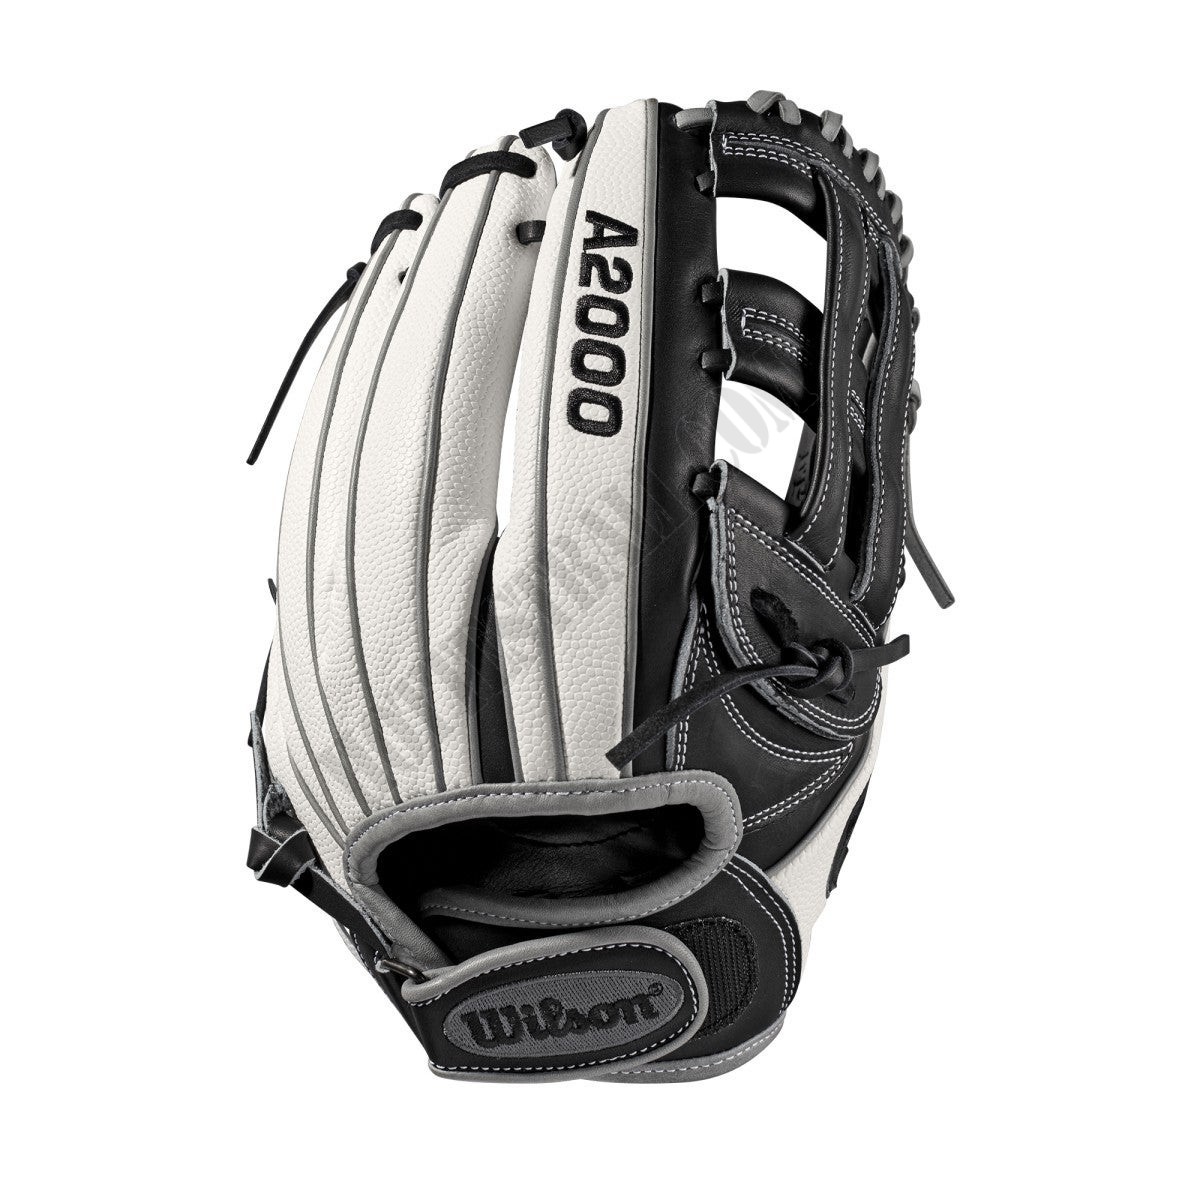 2019 A2000 FP12 SuperSkin 12" Infield Fastpitch Glove - Right Hand Throw ● Wilson Promotions - -1